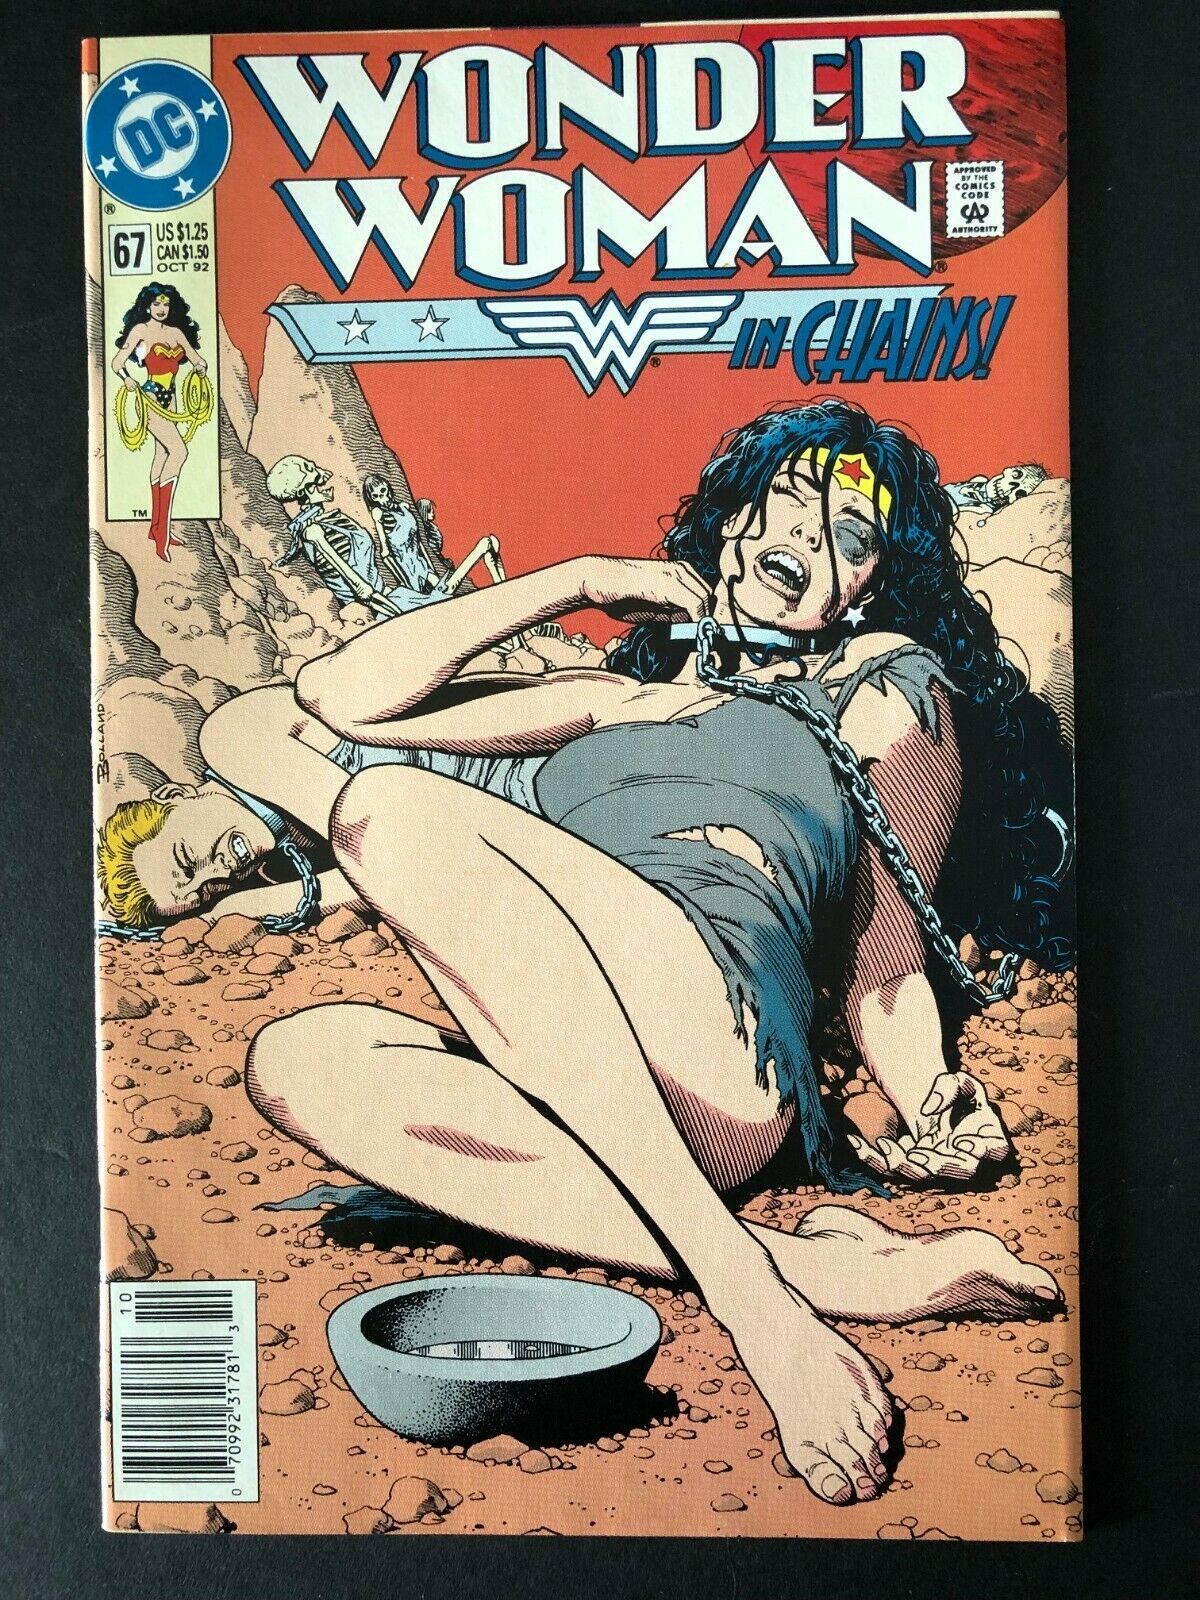 Dc Wonder Woman 67 In Chains Newsstand Ed Brian Bolland Bondage Cover Vf 70992317813